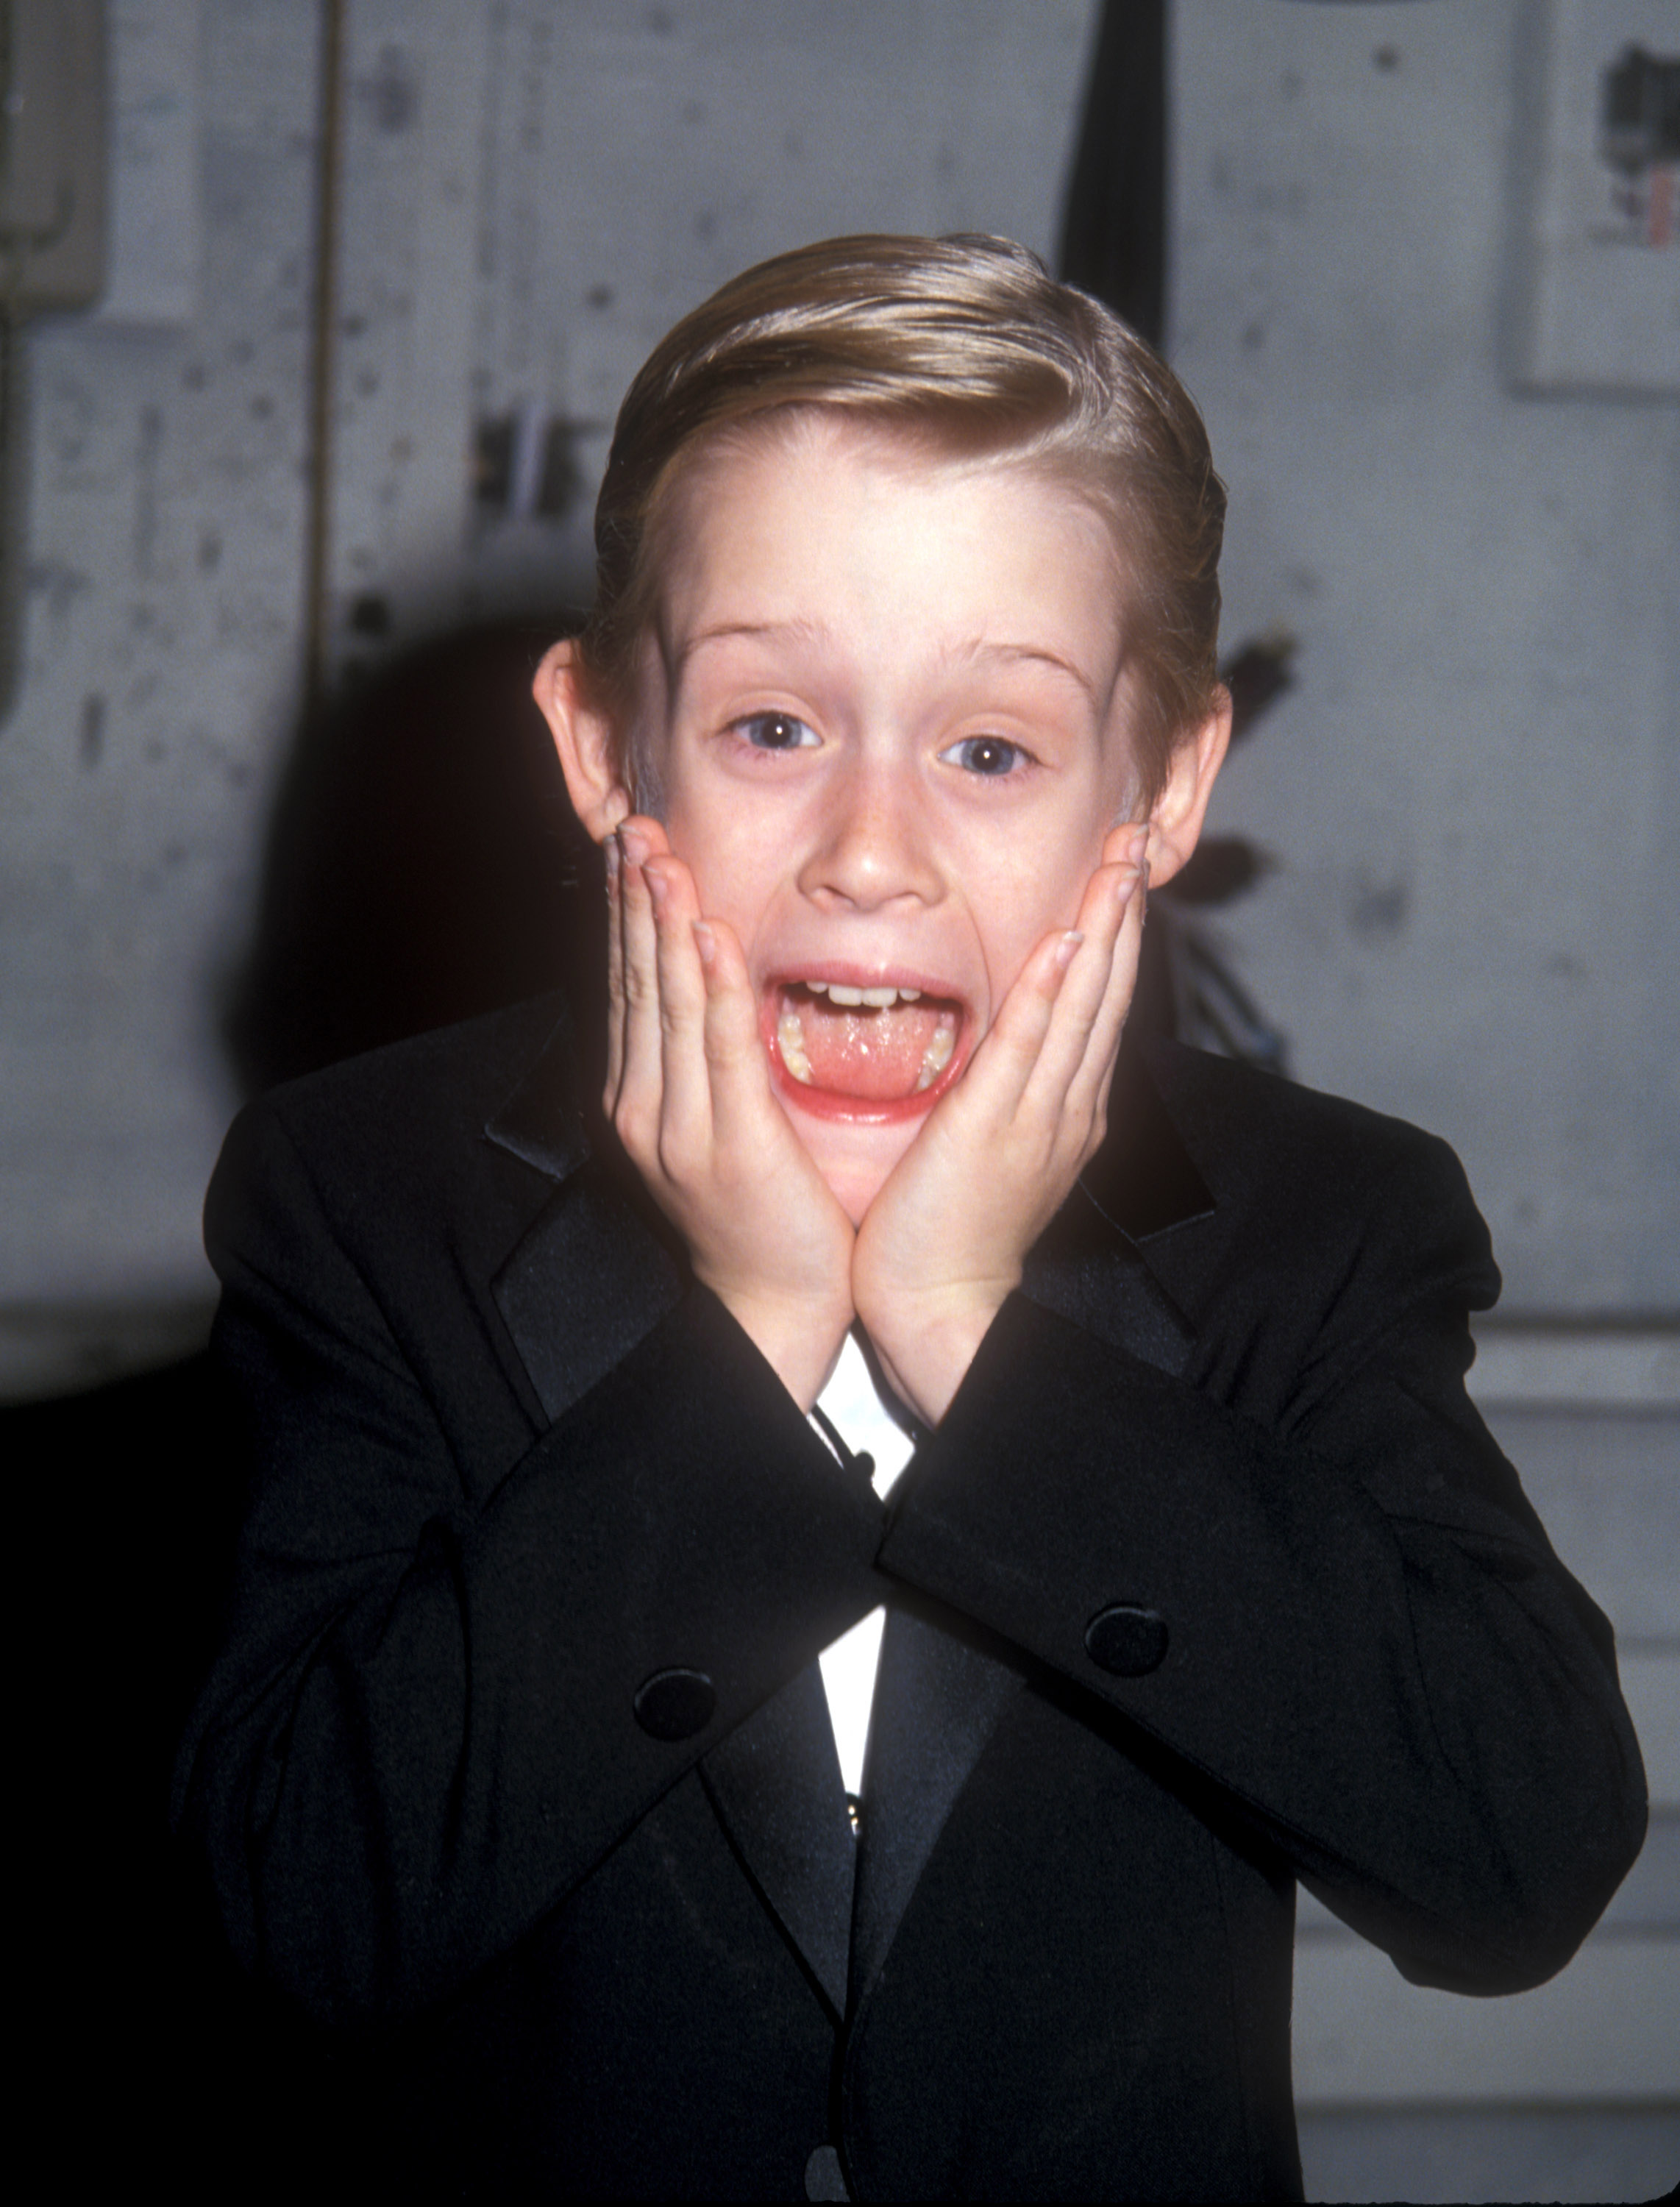 Macaulay Culkin at the American Comedy Awards in Los Angeles, California in 1991 | Source: Getty Images